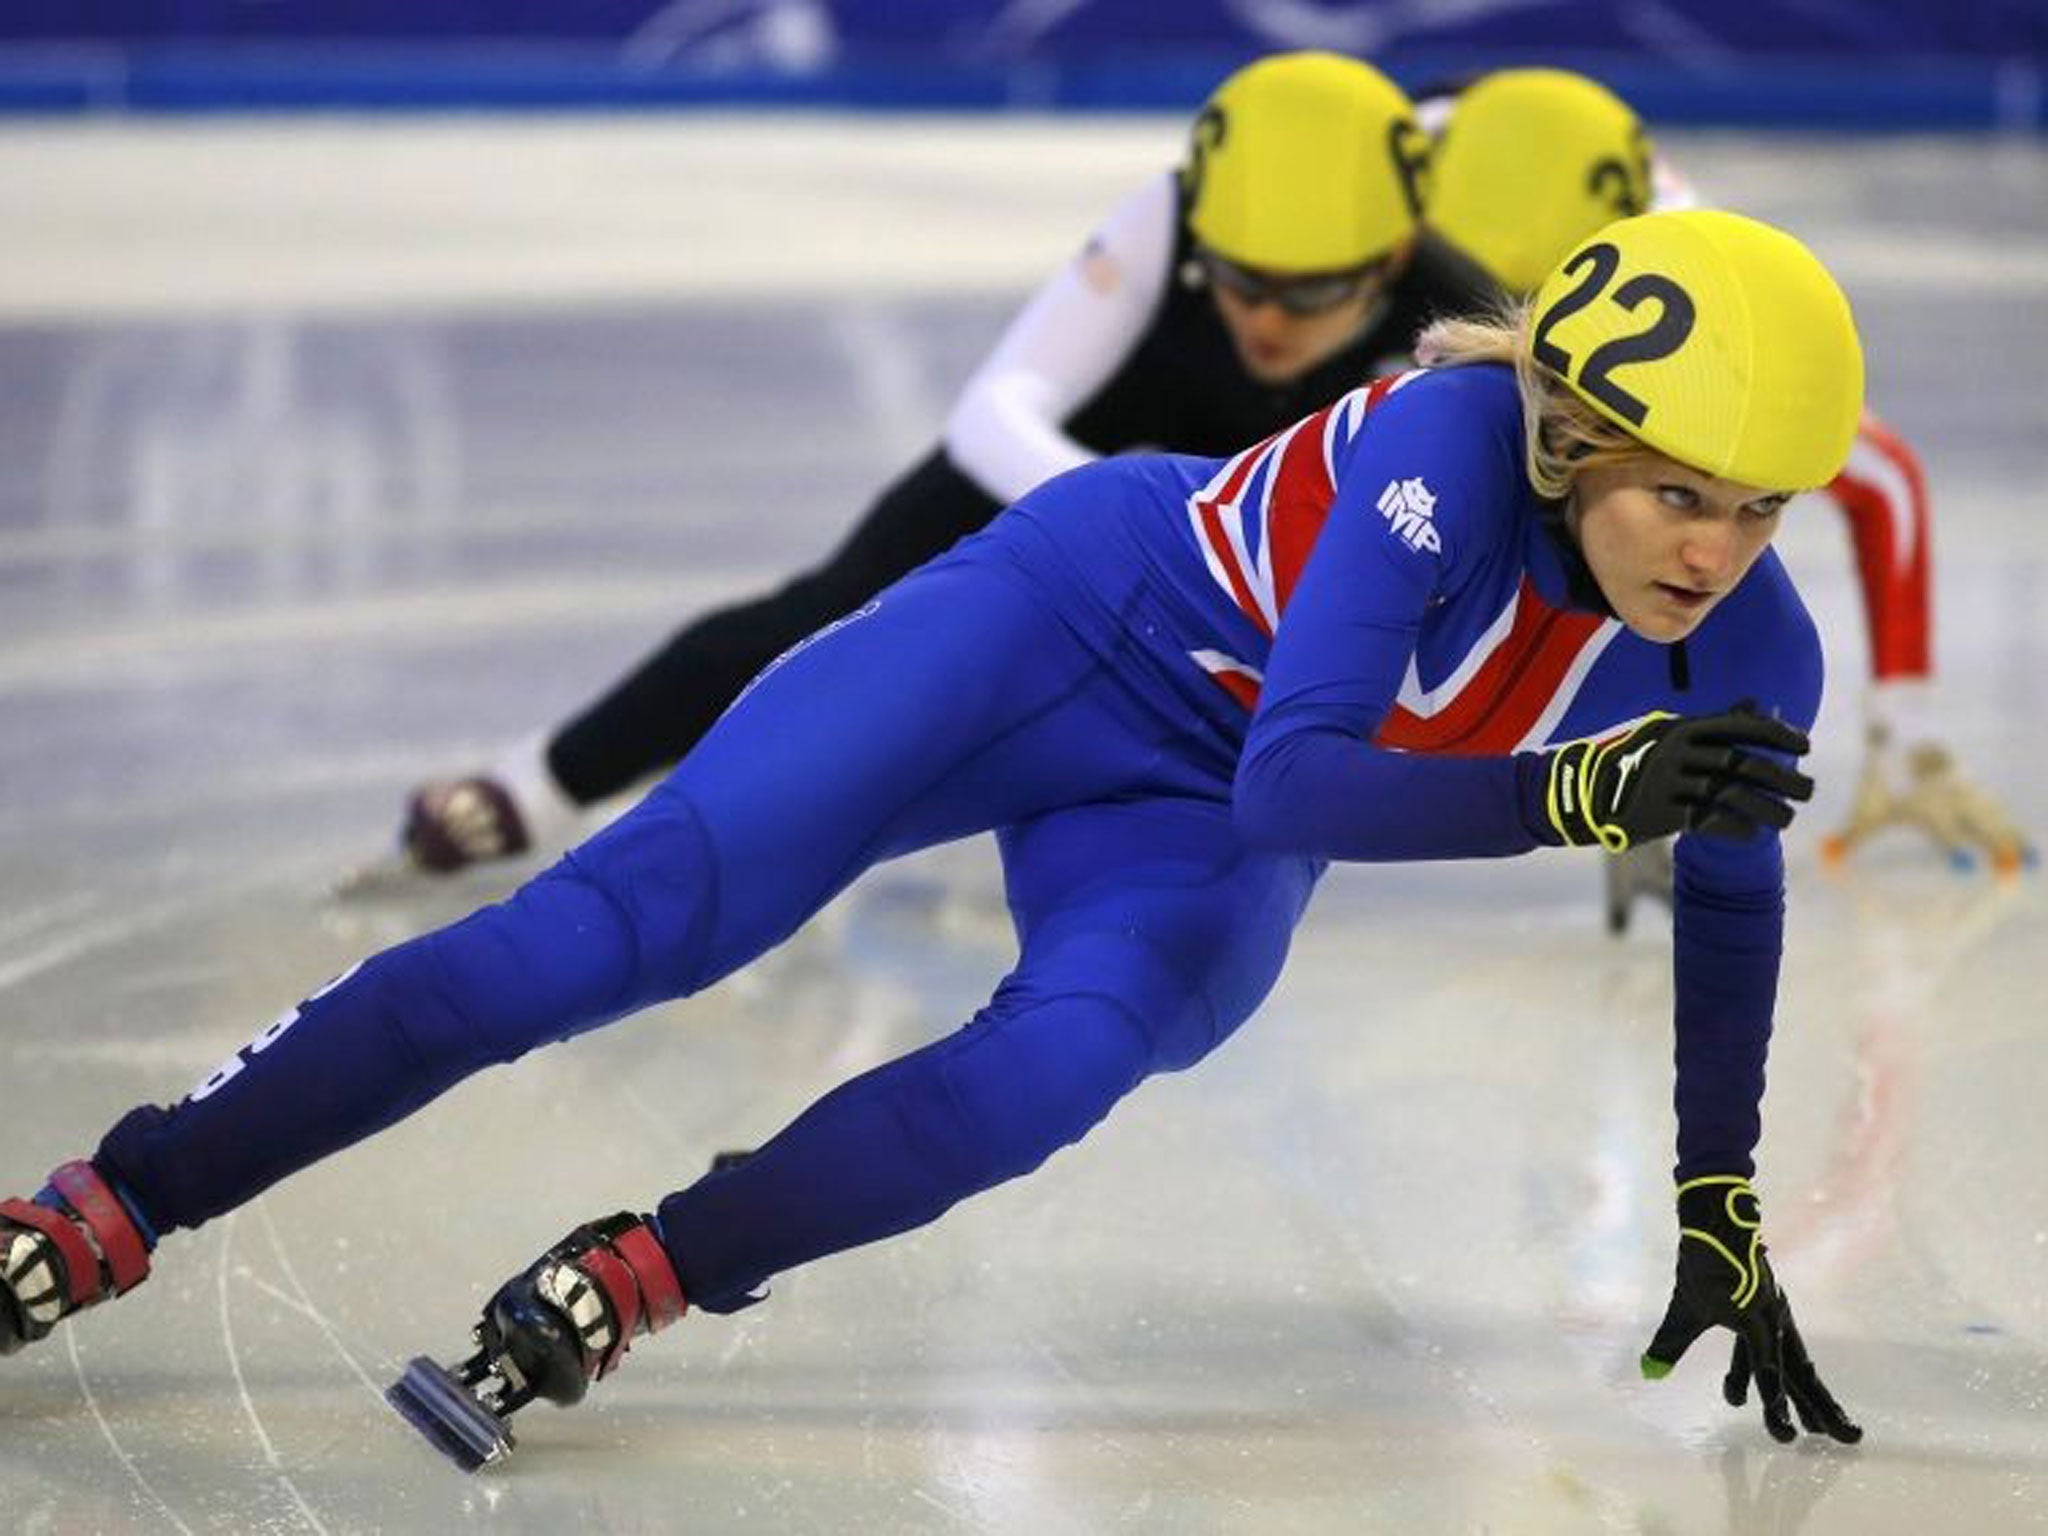 Elise Christie put the seal on her successful season